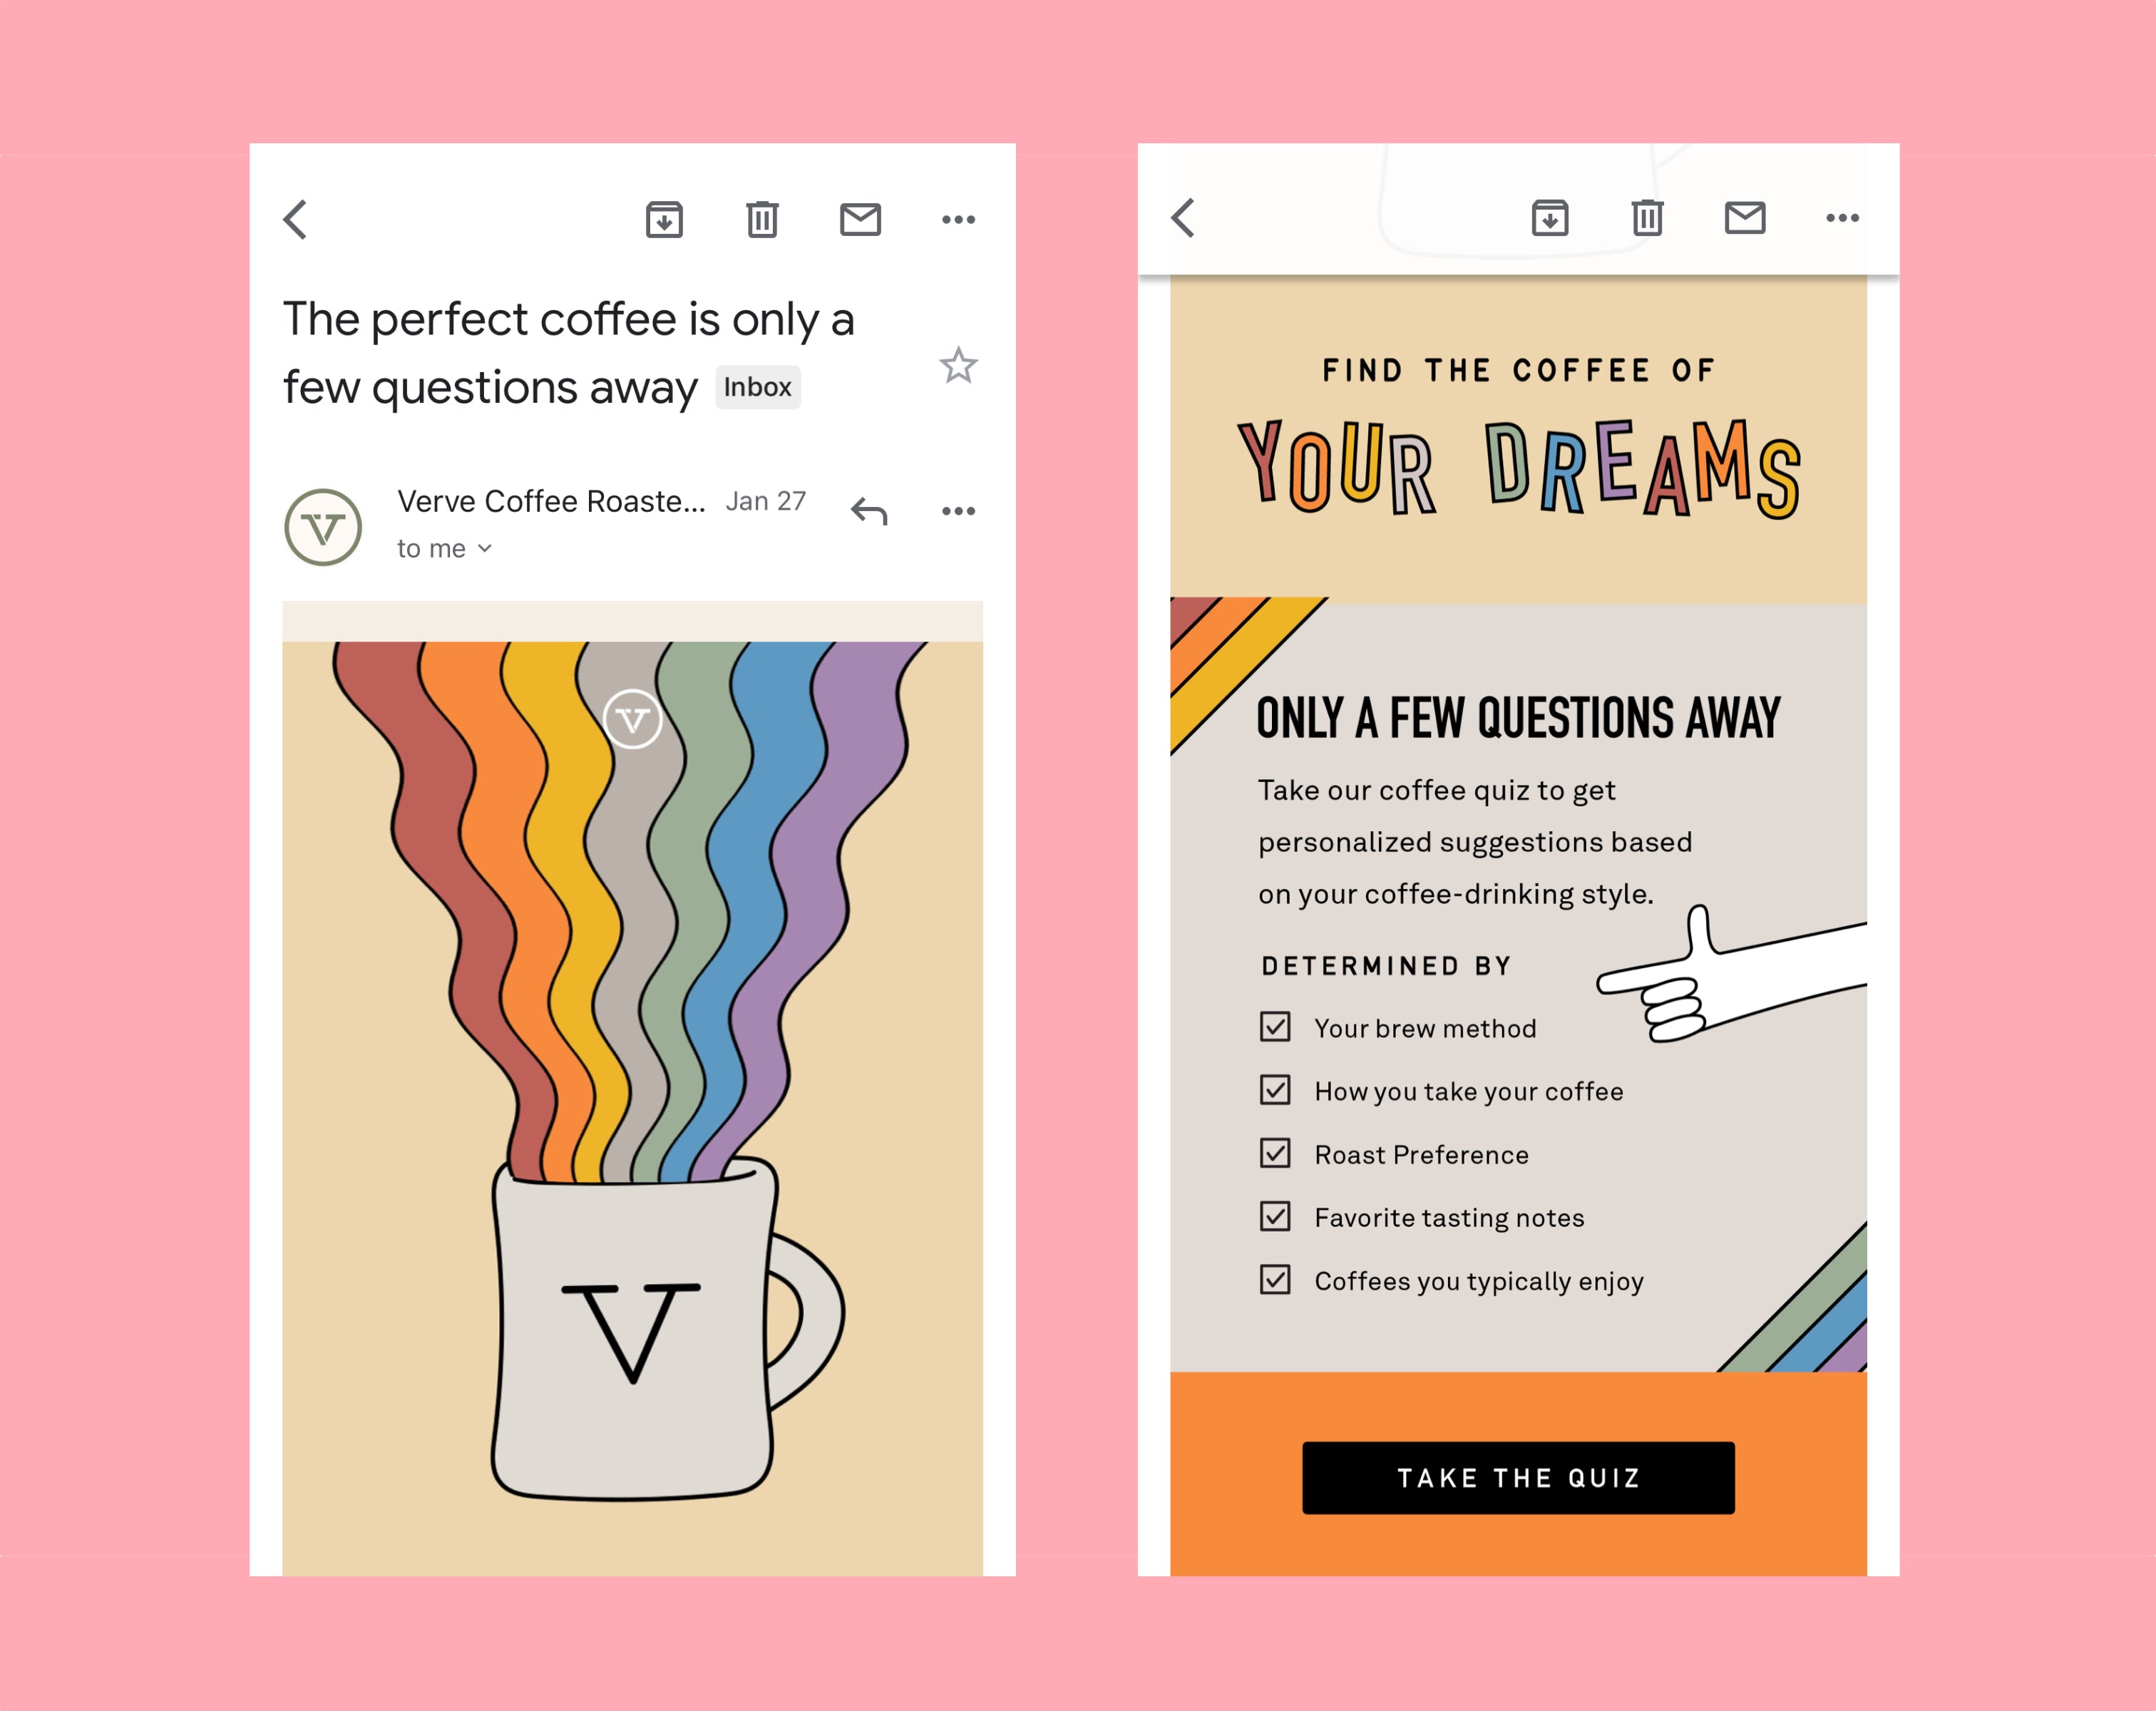 Side by side shots of Verve Coffee email marketing promoting an onsite quiz